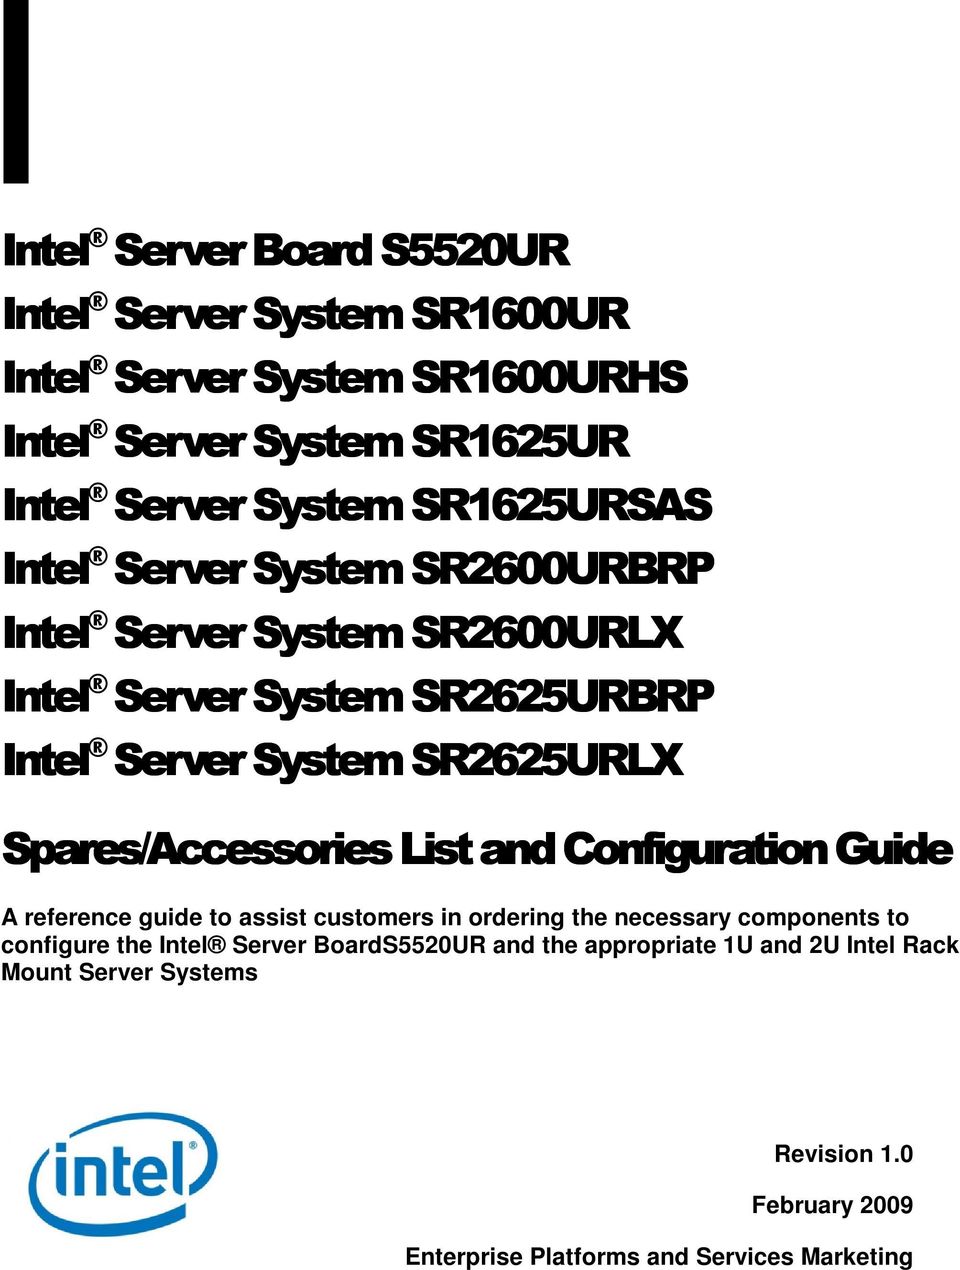 SR2625UR 625URLX Spares/Accessories List and Configuration Guide A reference guide to assist customers in ordering the necessary components to configure